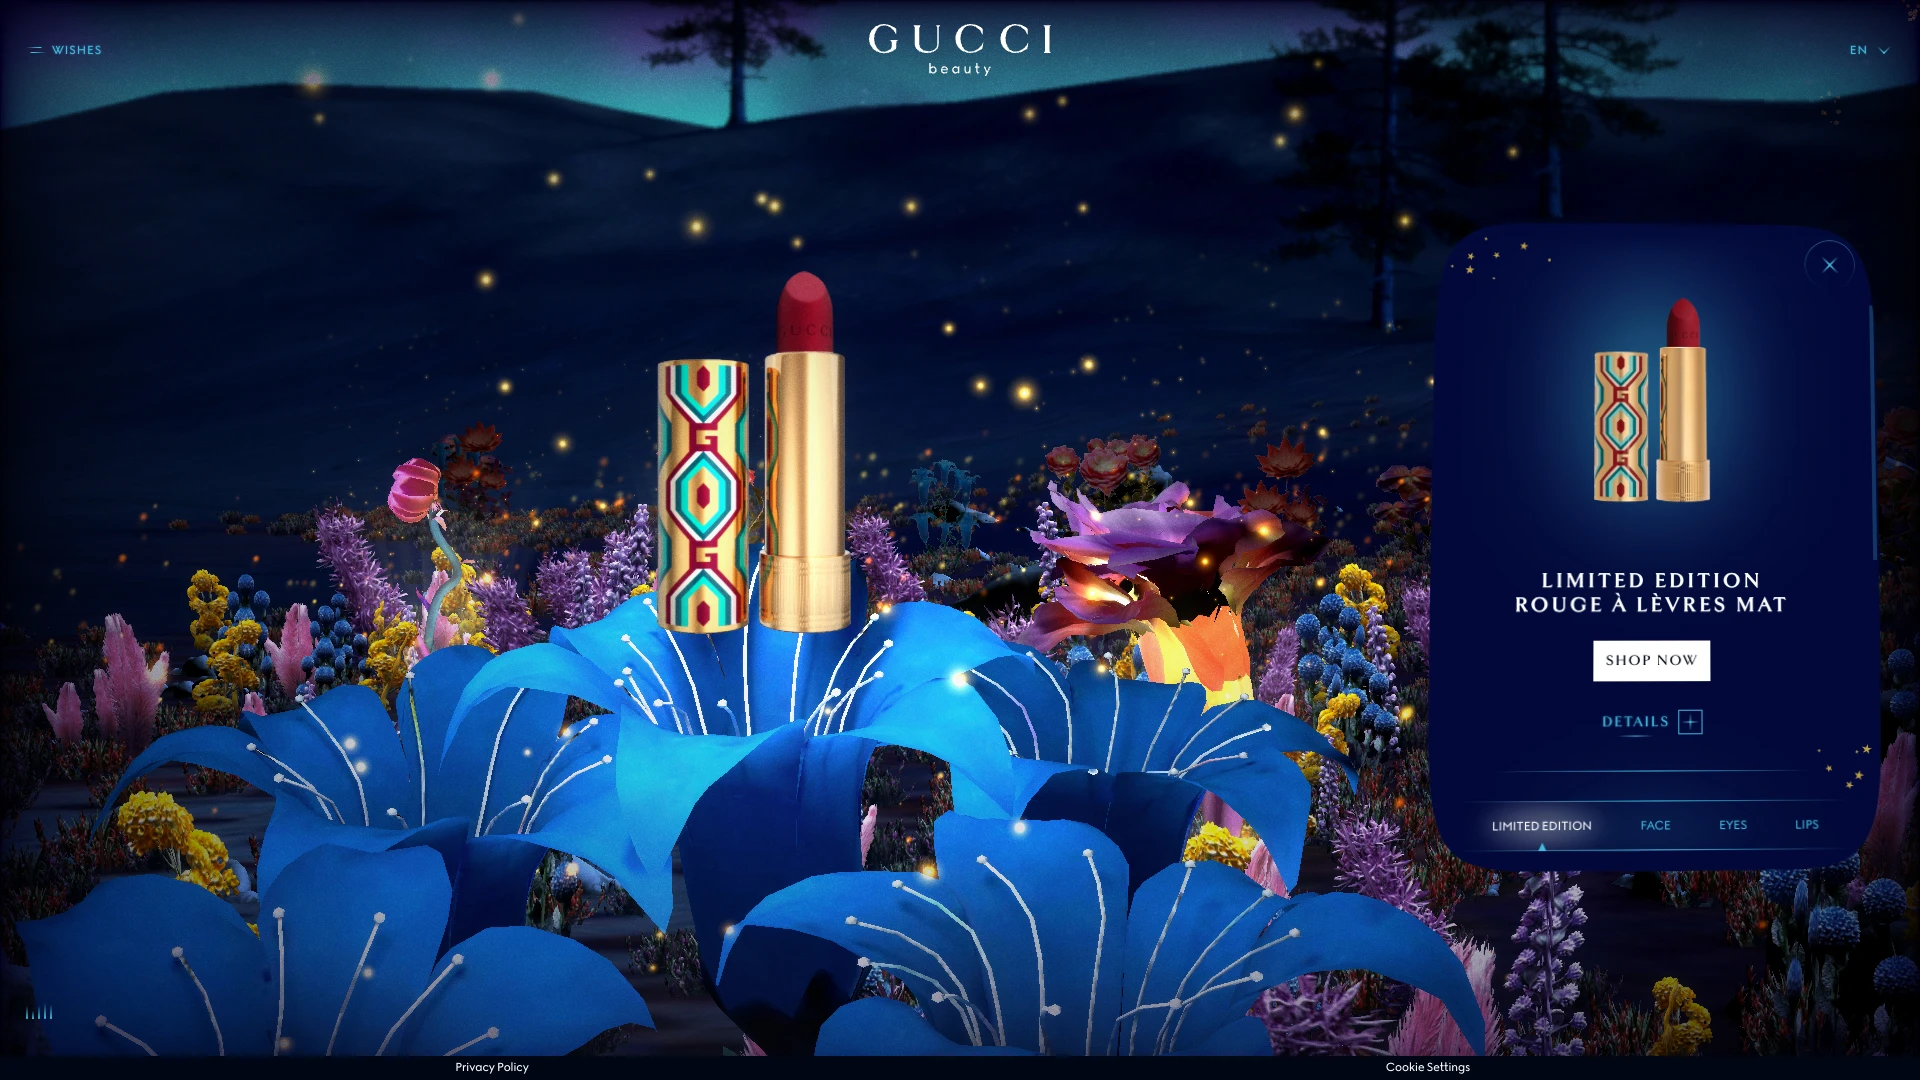 Gucci Beauty Wishes